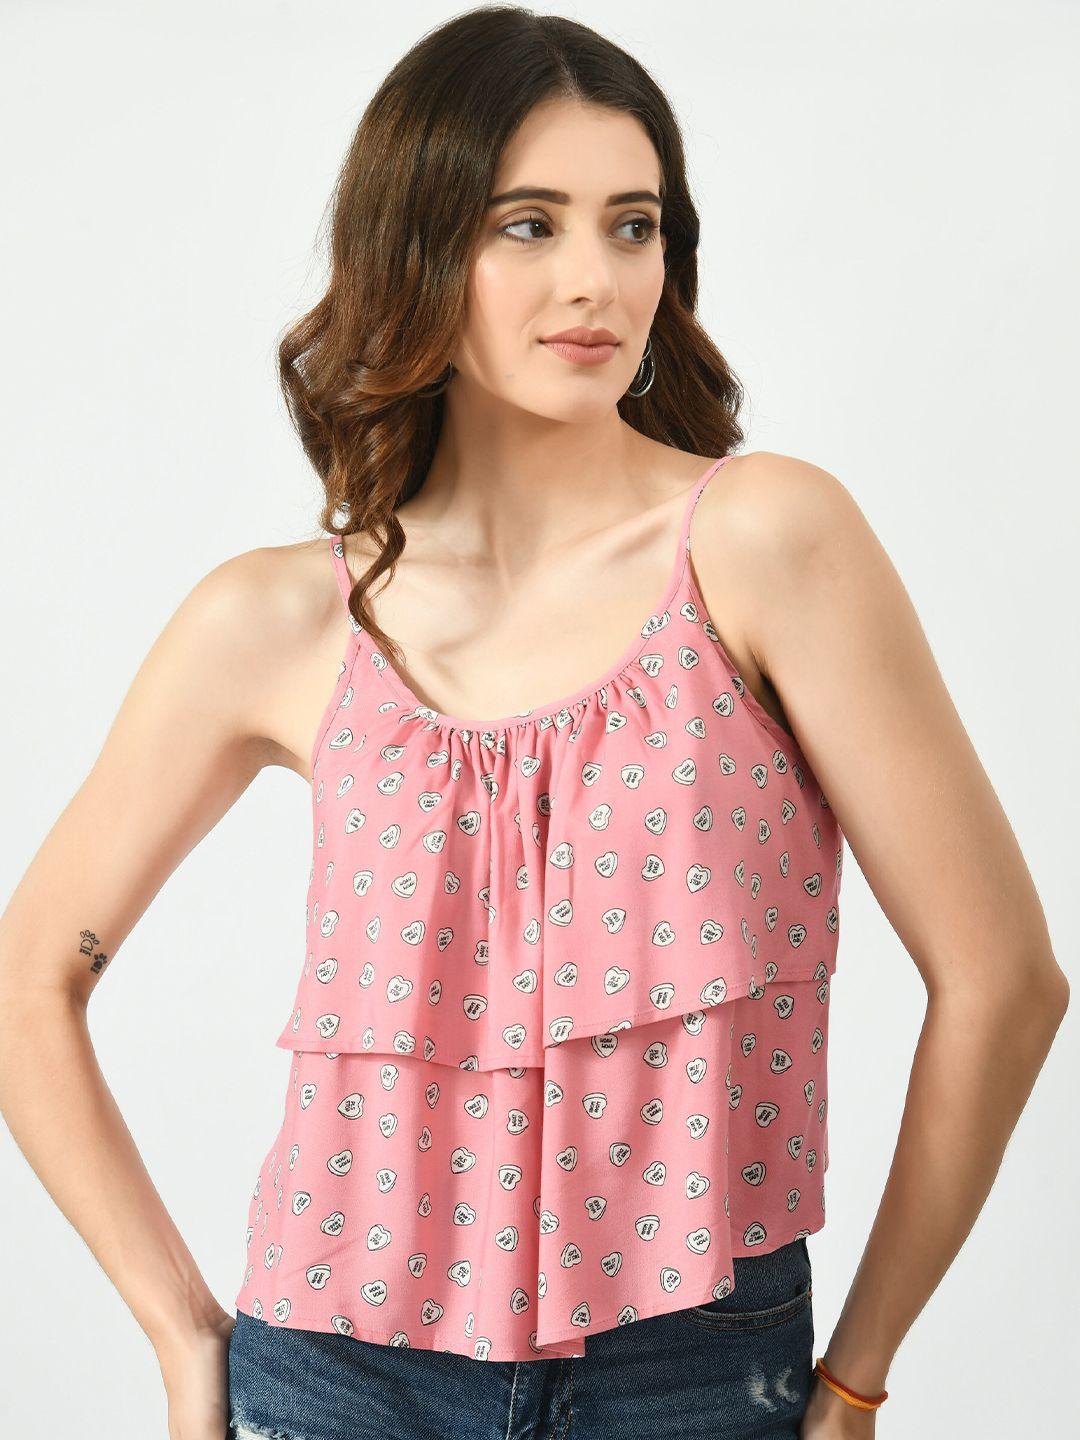 dressberry pink conversational printed layered top